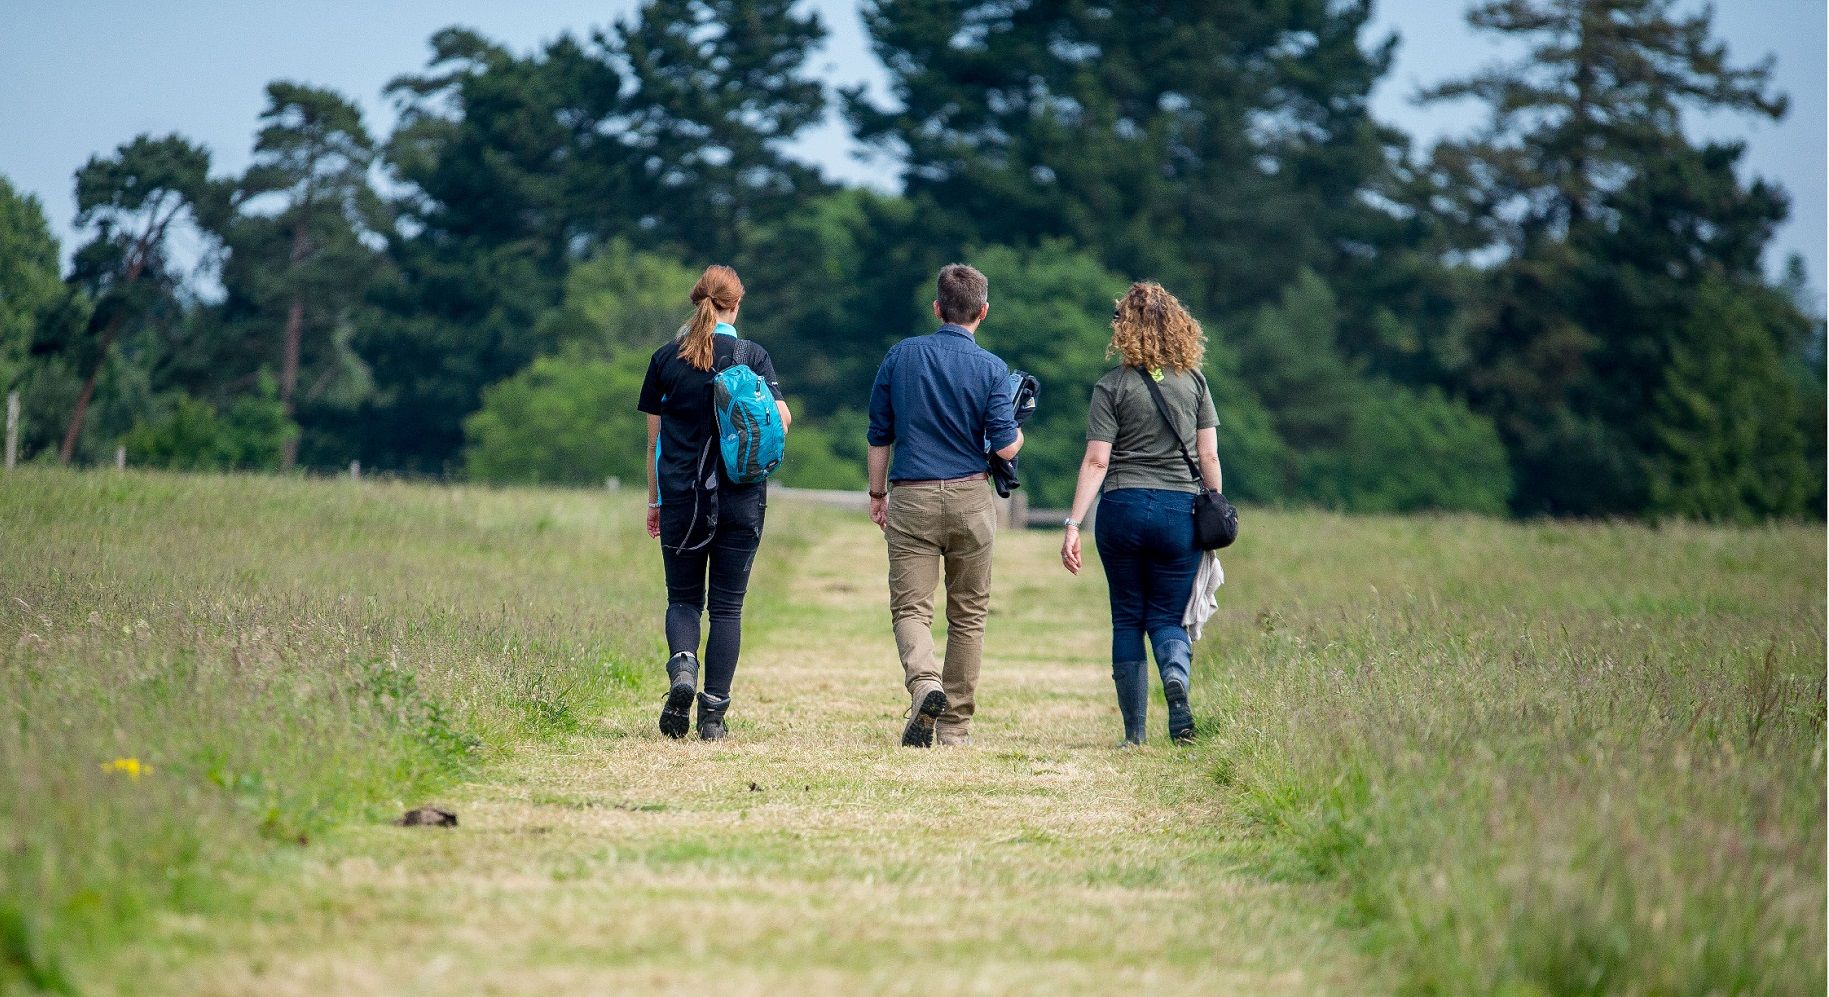 Image of people walking through a field